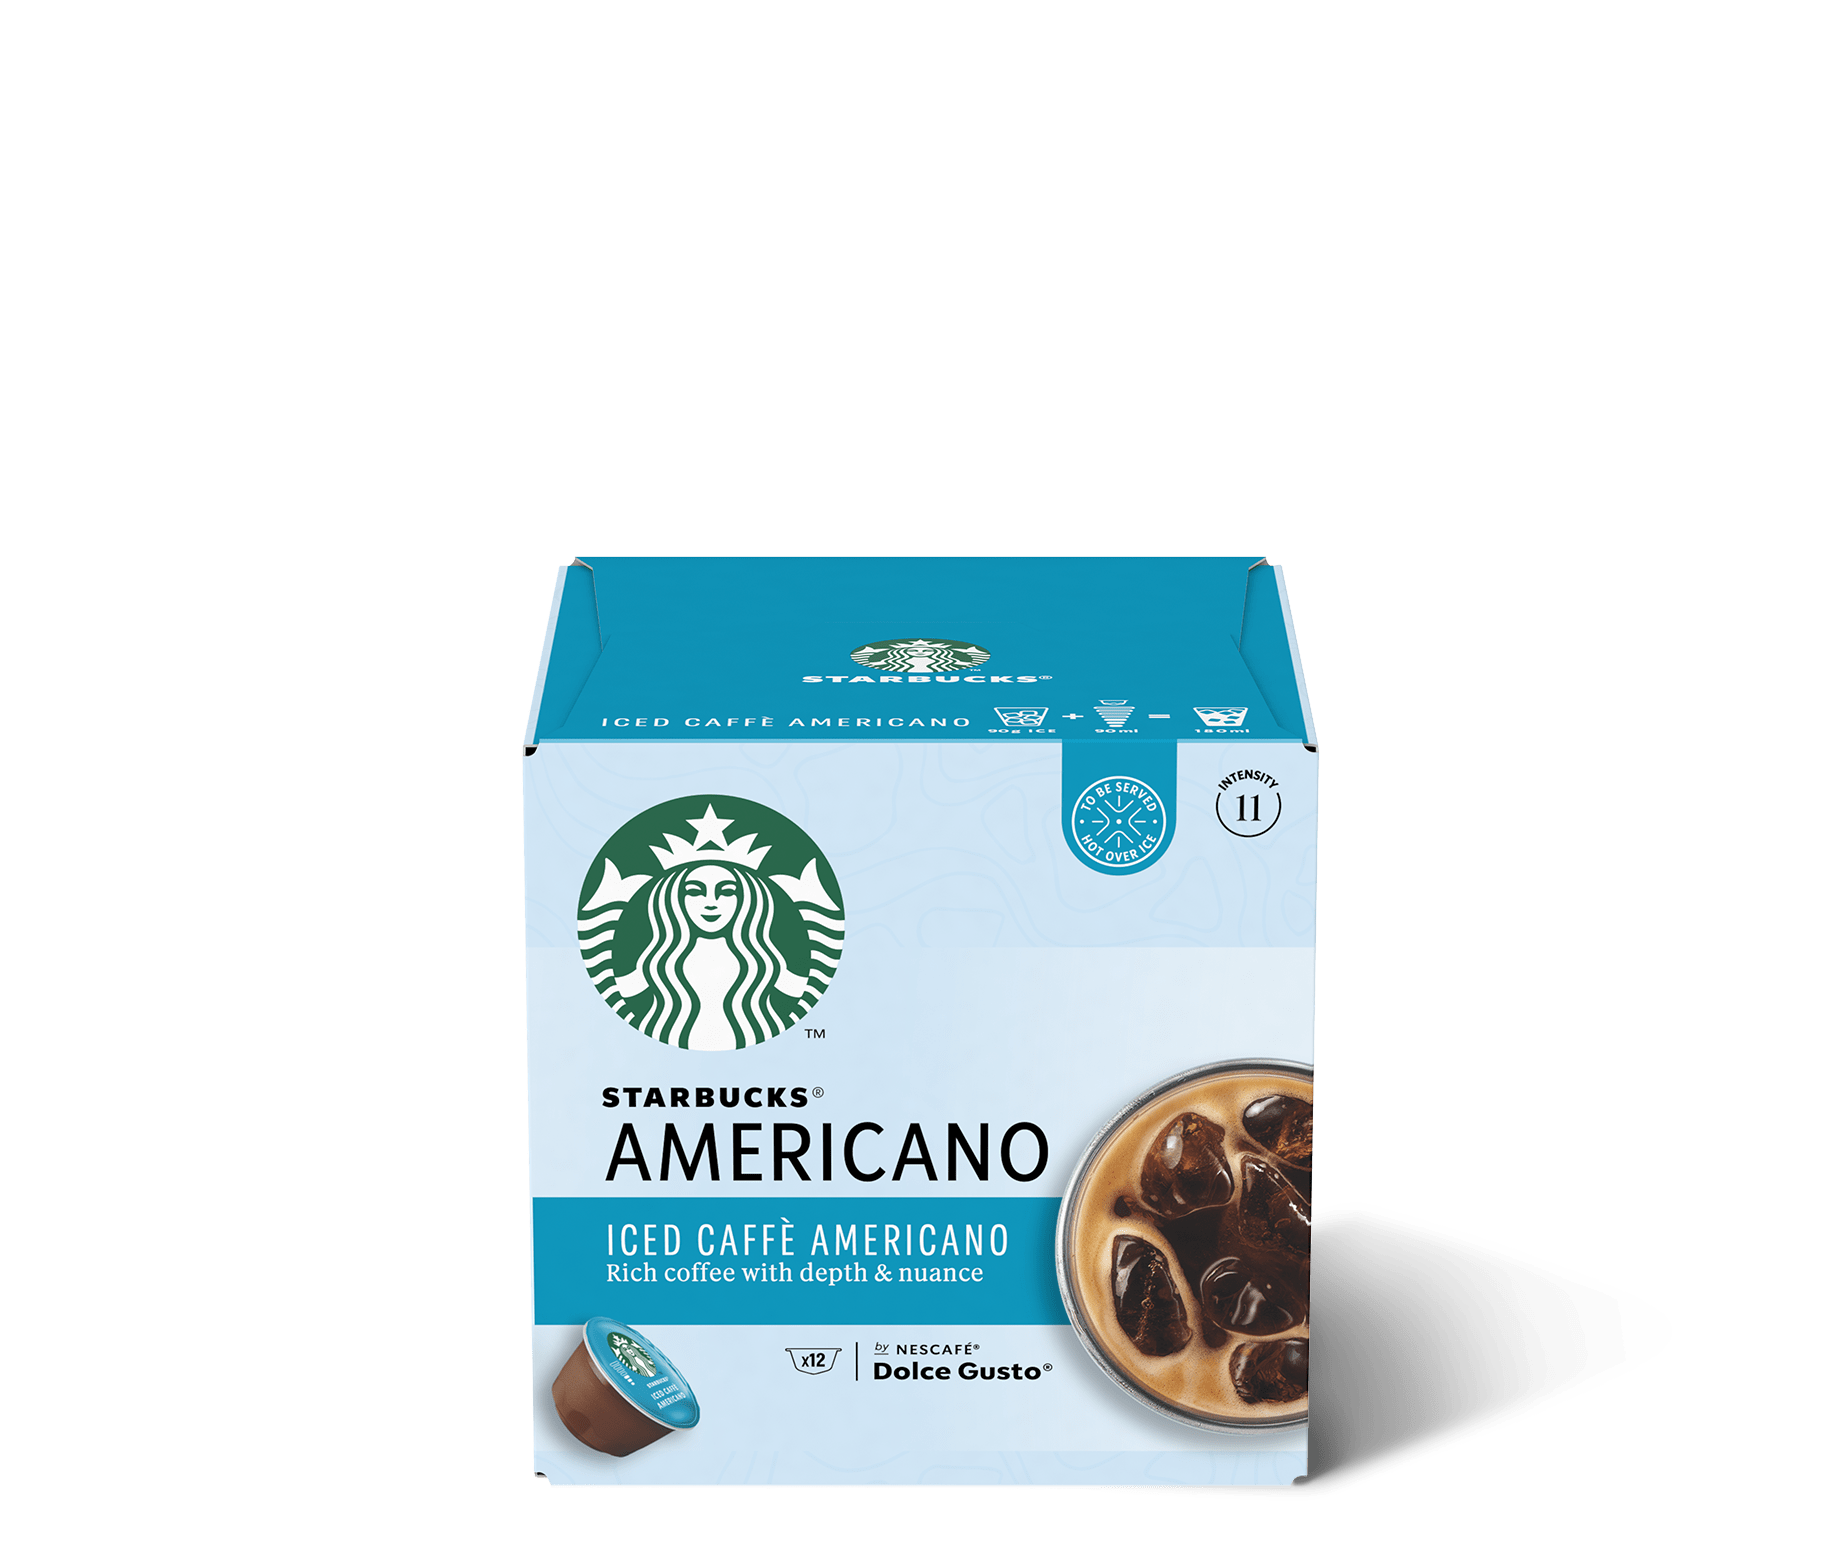 Nescafé Dolce Gusto Starbucks House Blend Americano Coffee Capsules 12 Pack, Coffee Pods, Coffee, Drinks